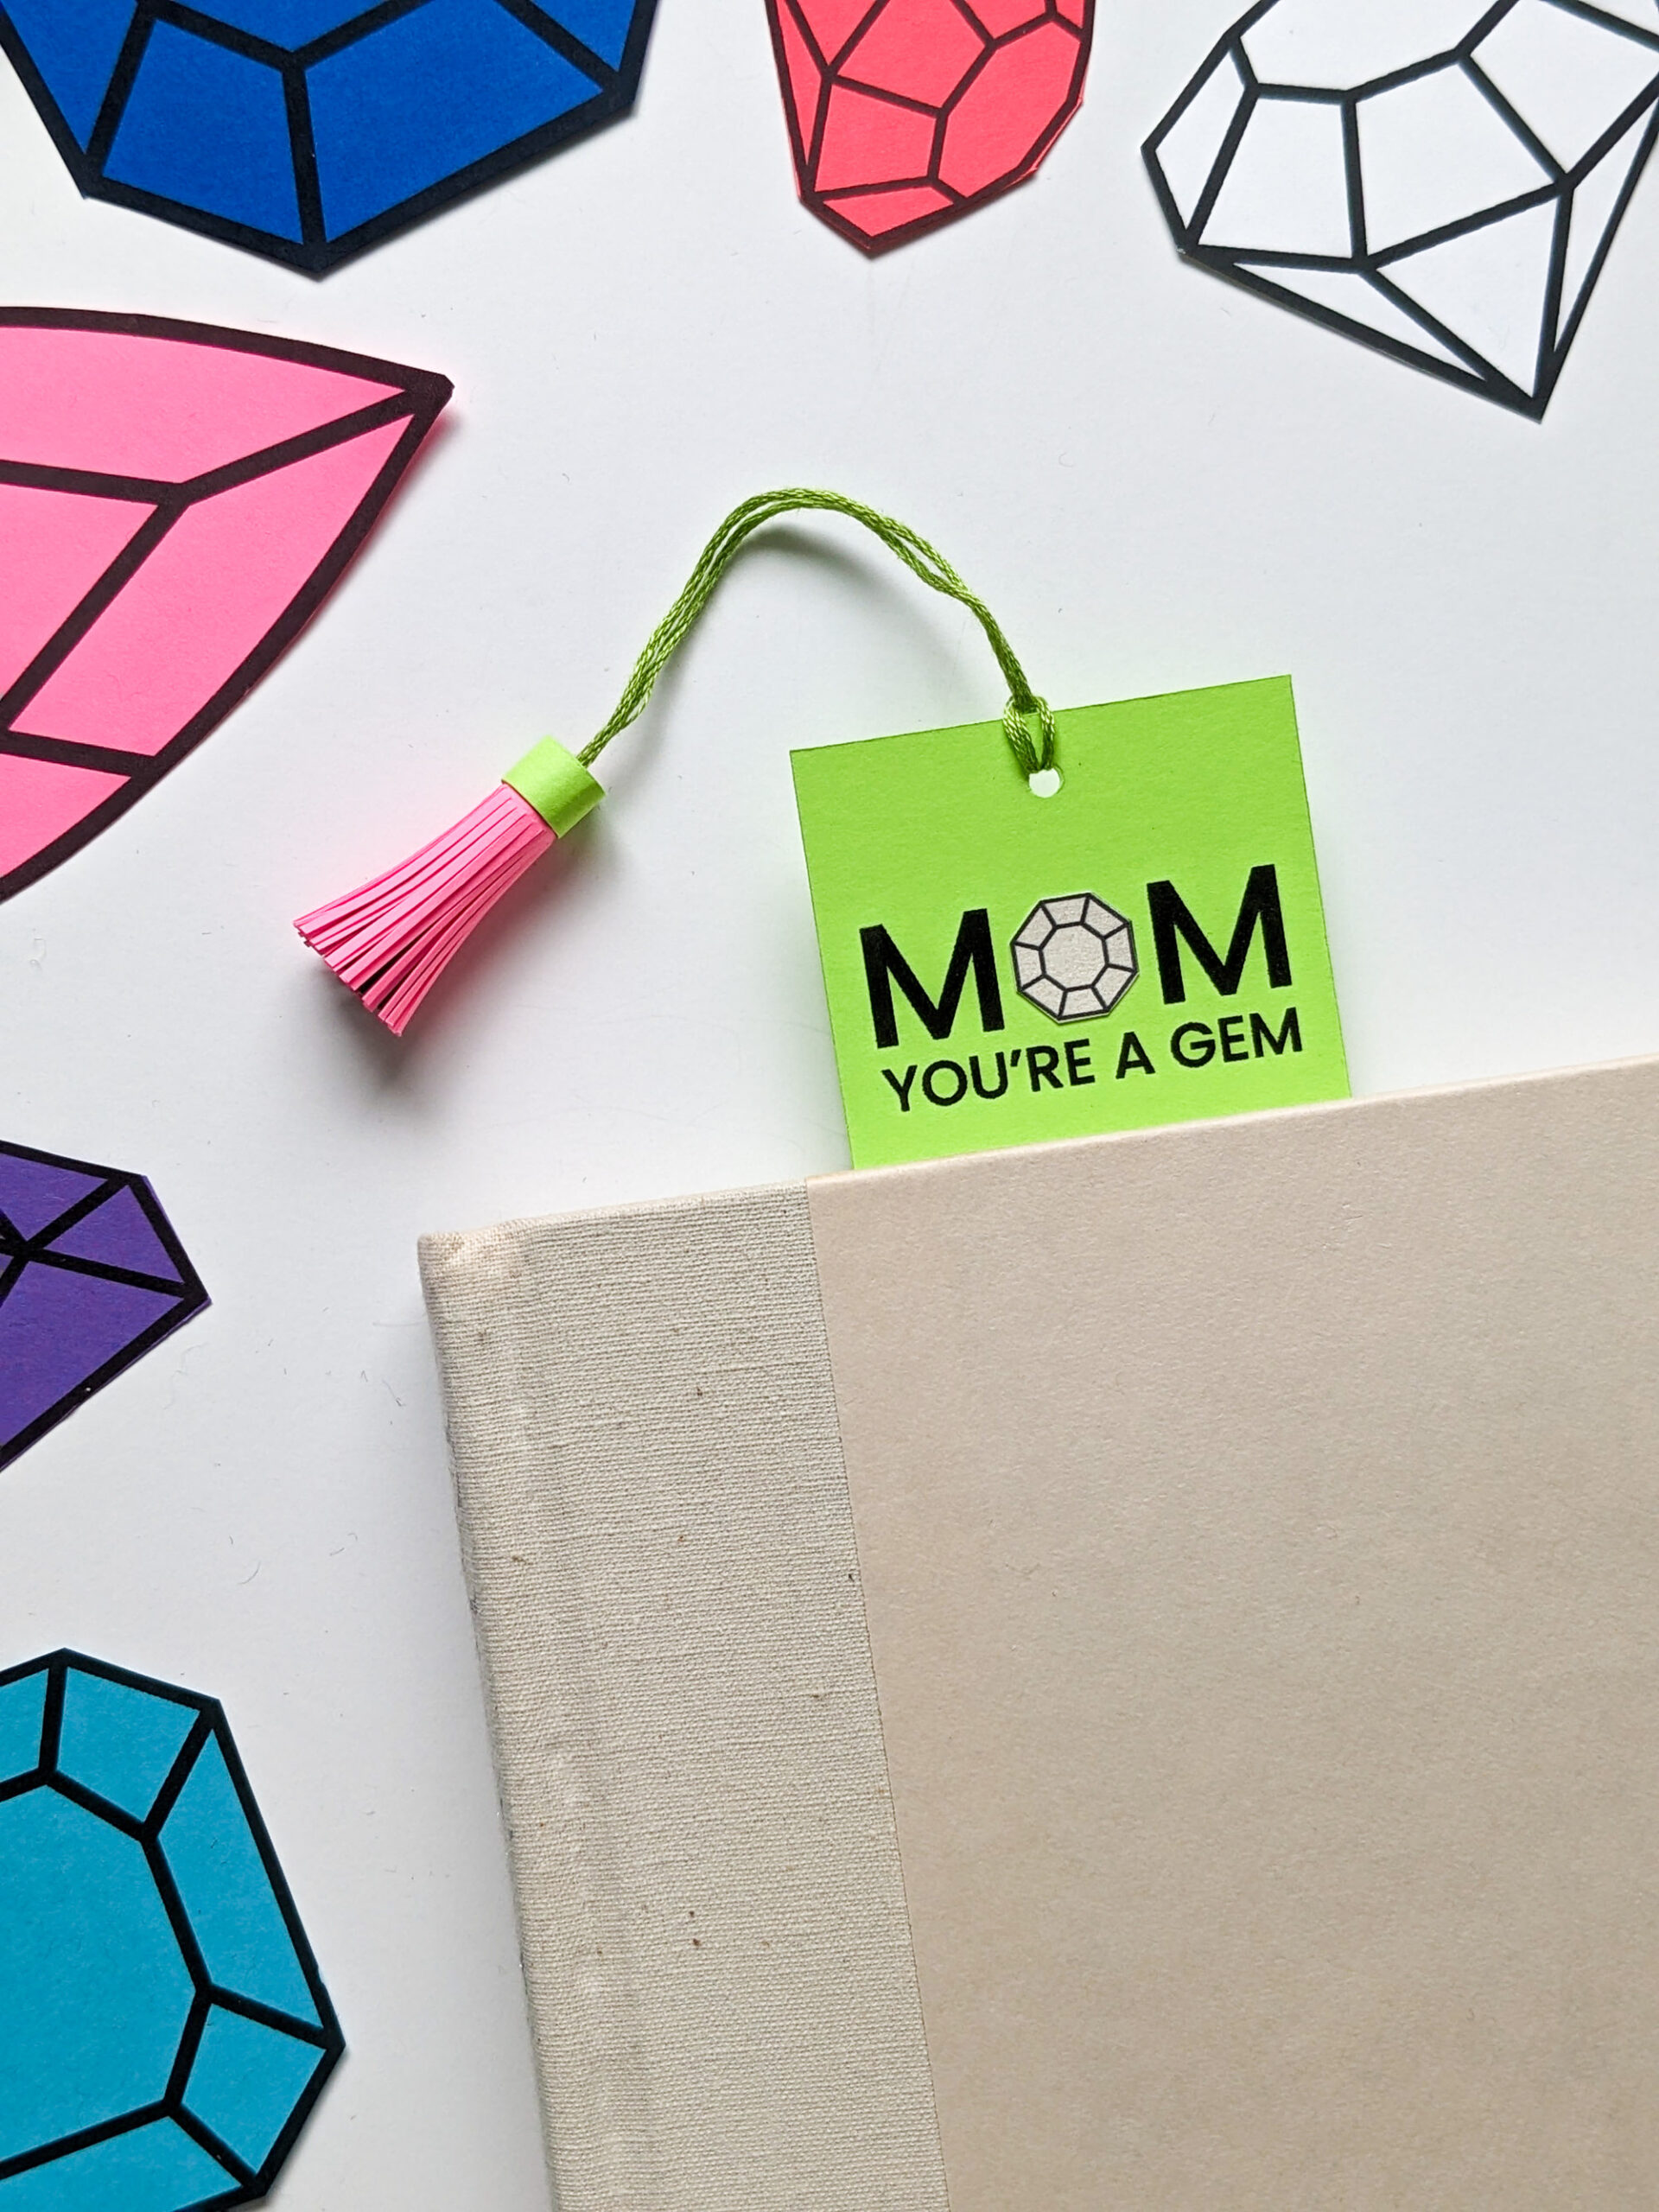 Mom You're a Gem handmade bookmark and DIY paper tassel marking a page in a book